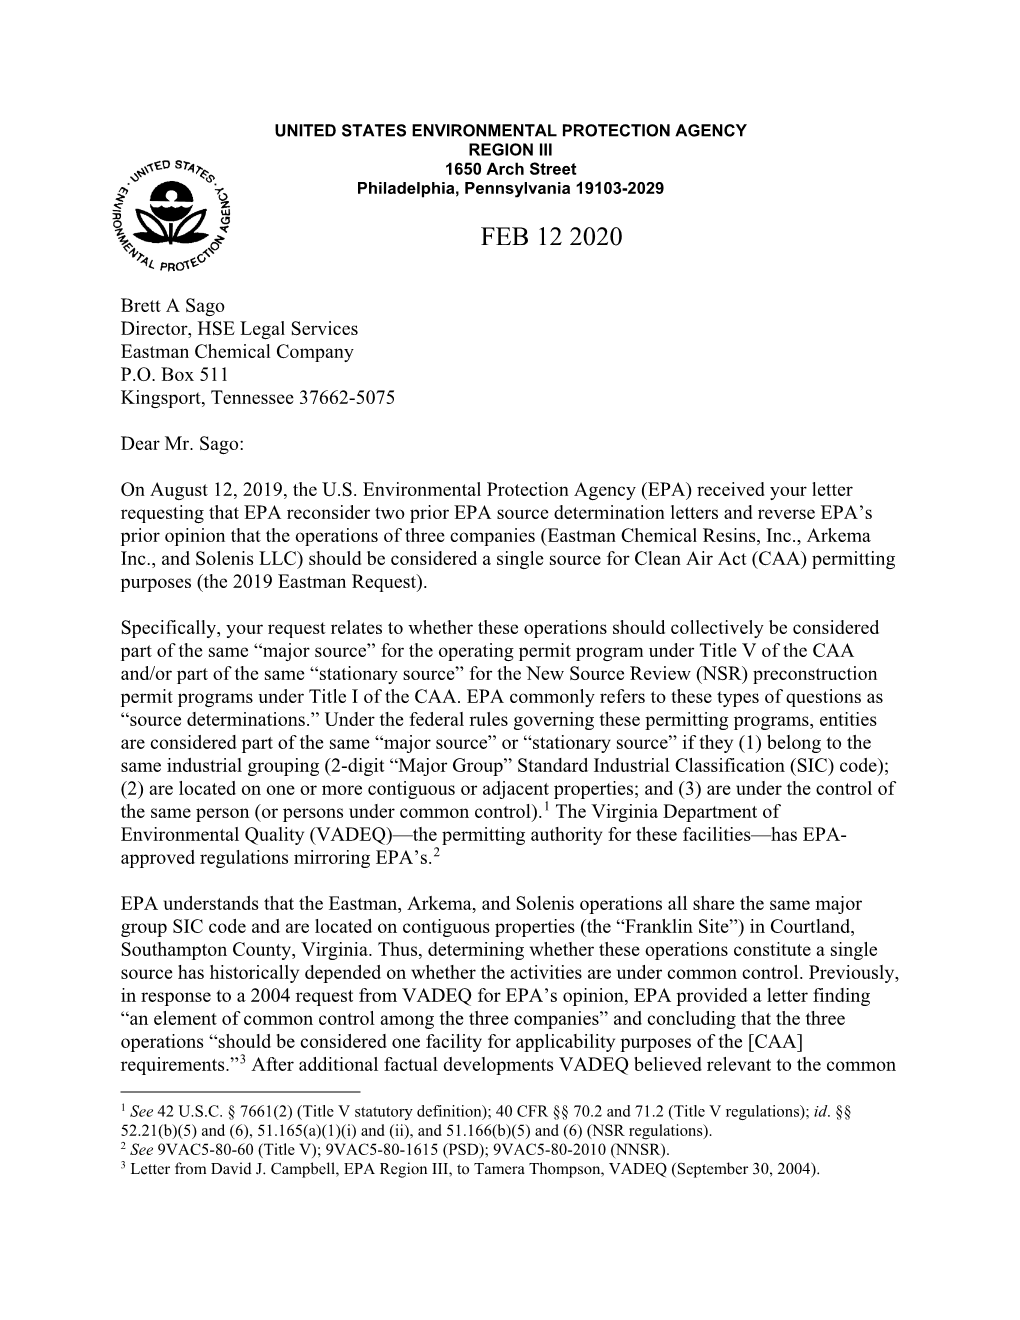 EPA's Response to Eastman Chemical Company's Request That